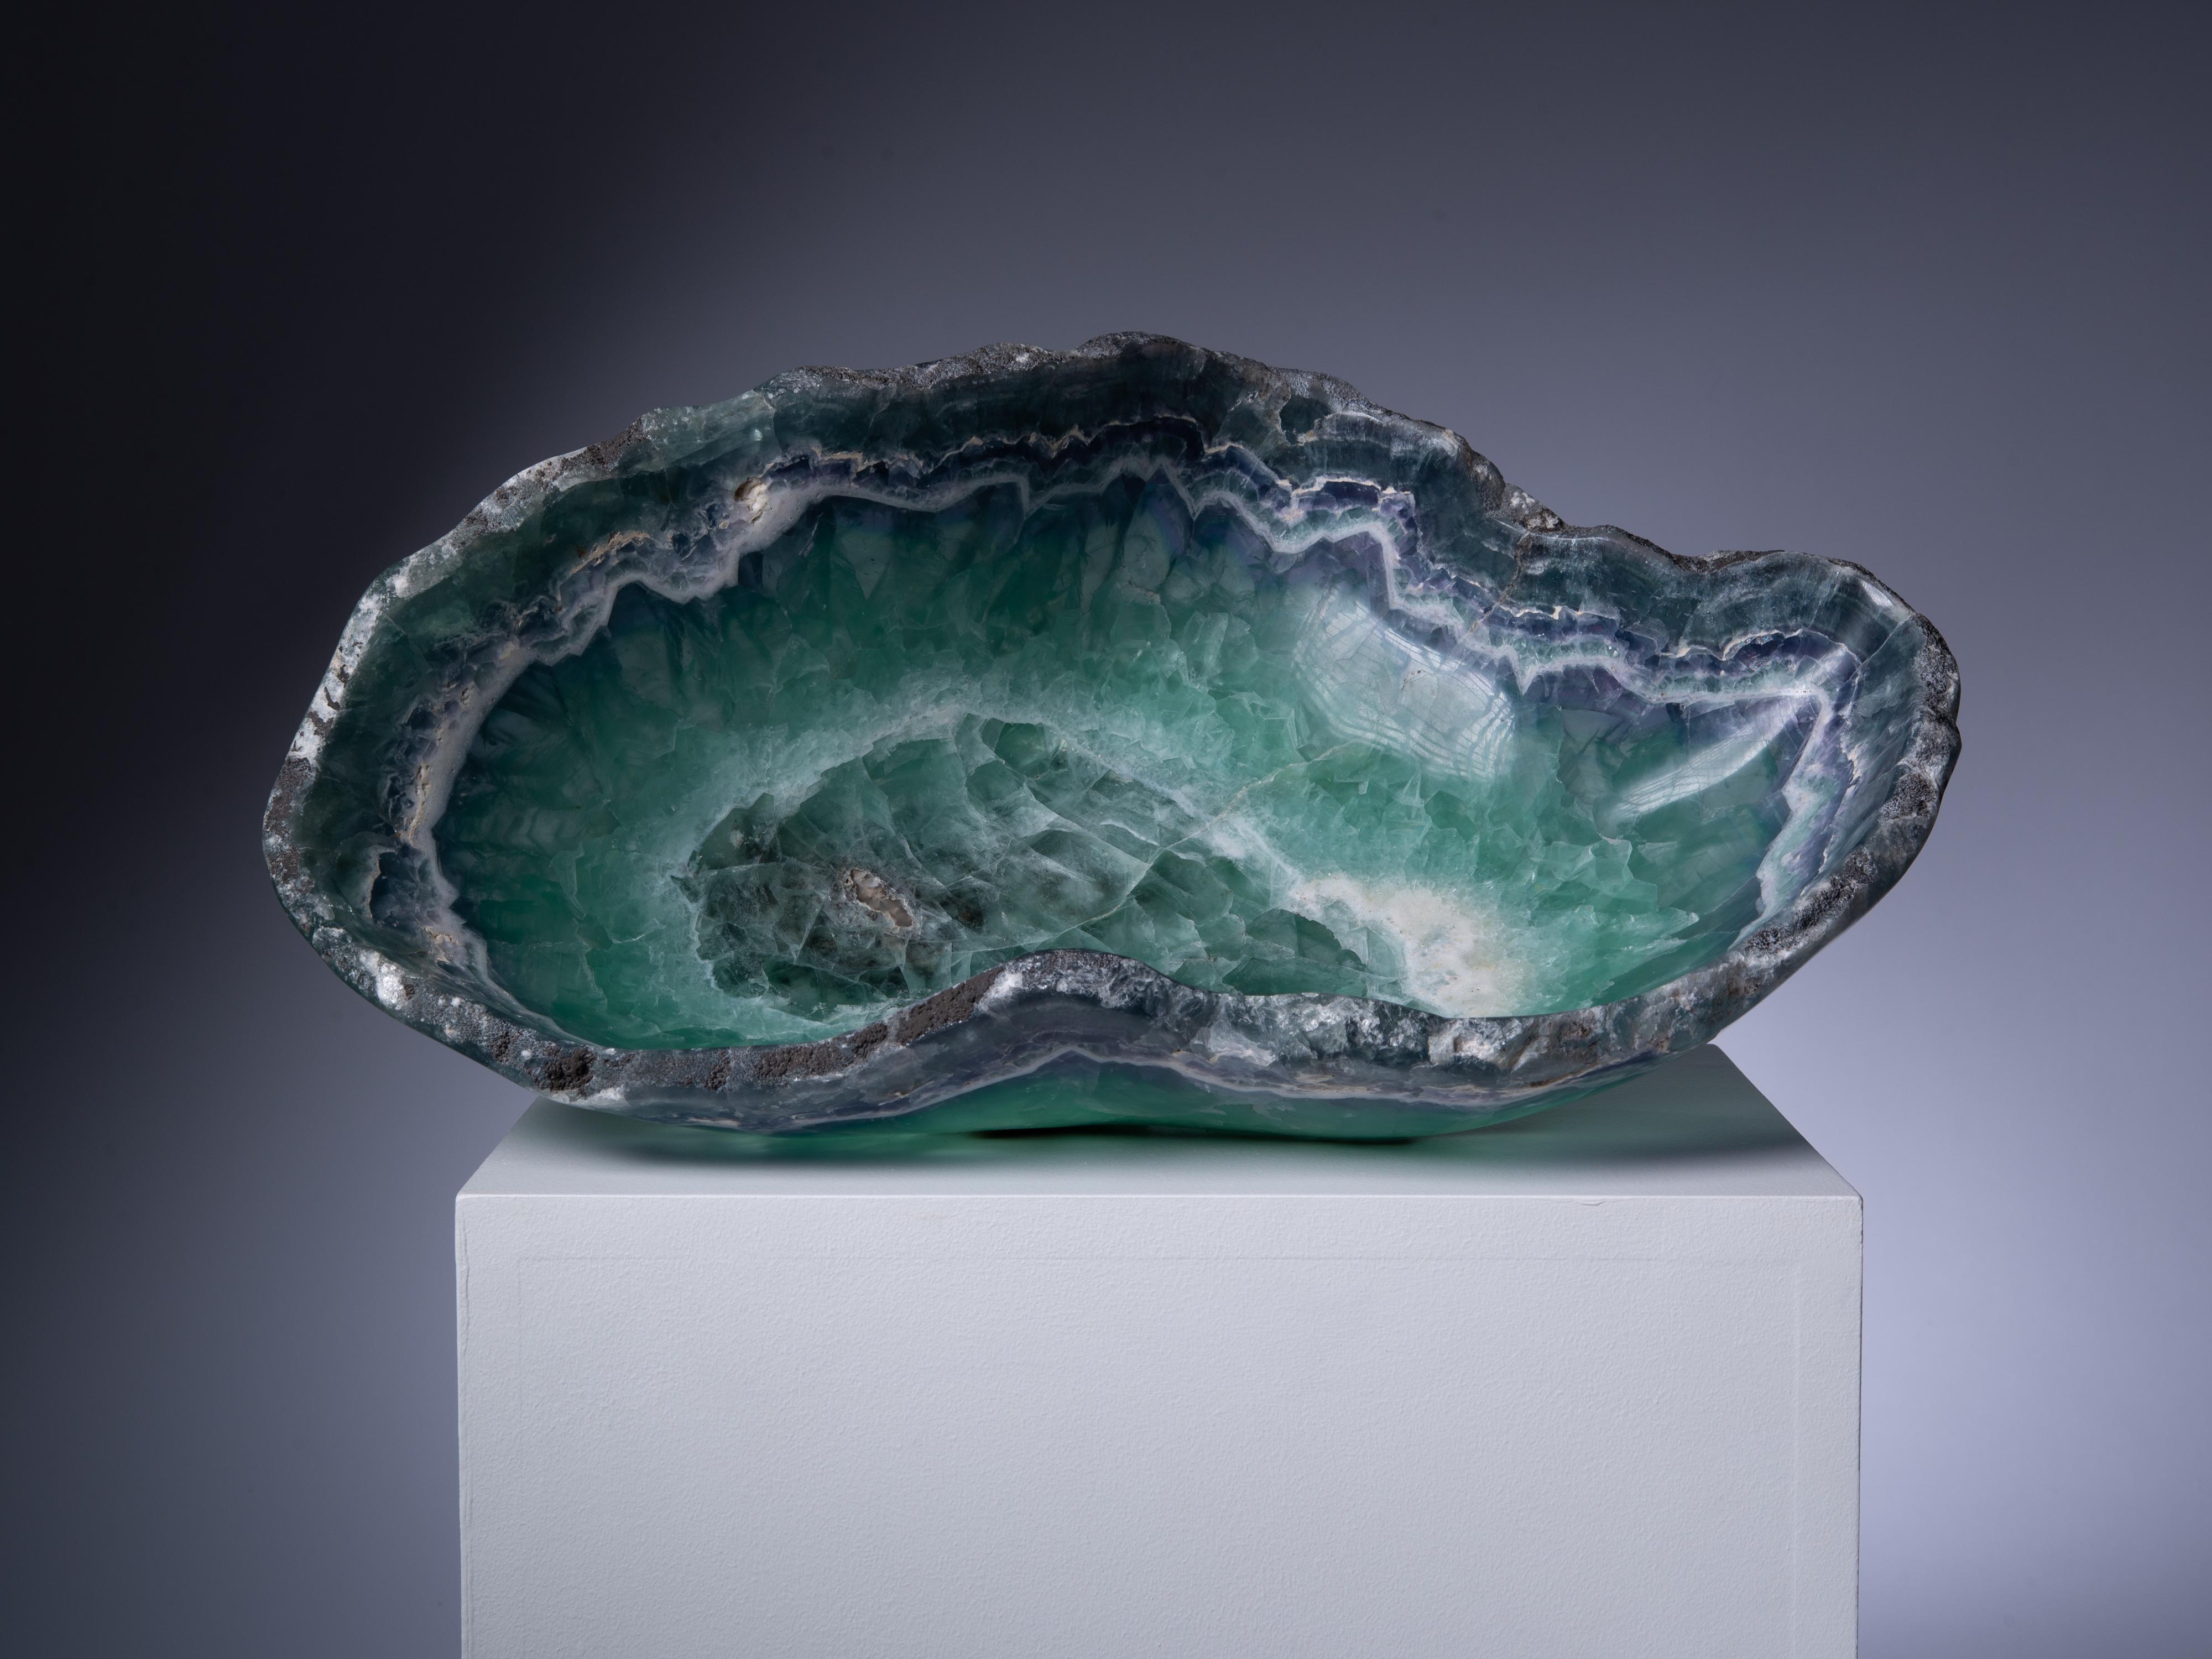 A gorgeous green-blue bowl carved from a single block of Mexican fluorite. The bowl has been beautifully contoured along the bands of the dark blue fluorite, with their attractive angular crystals visible in cross-section.

This piece was legally